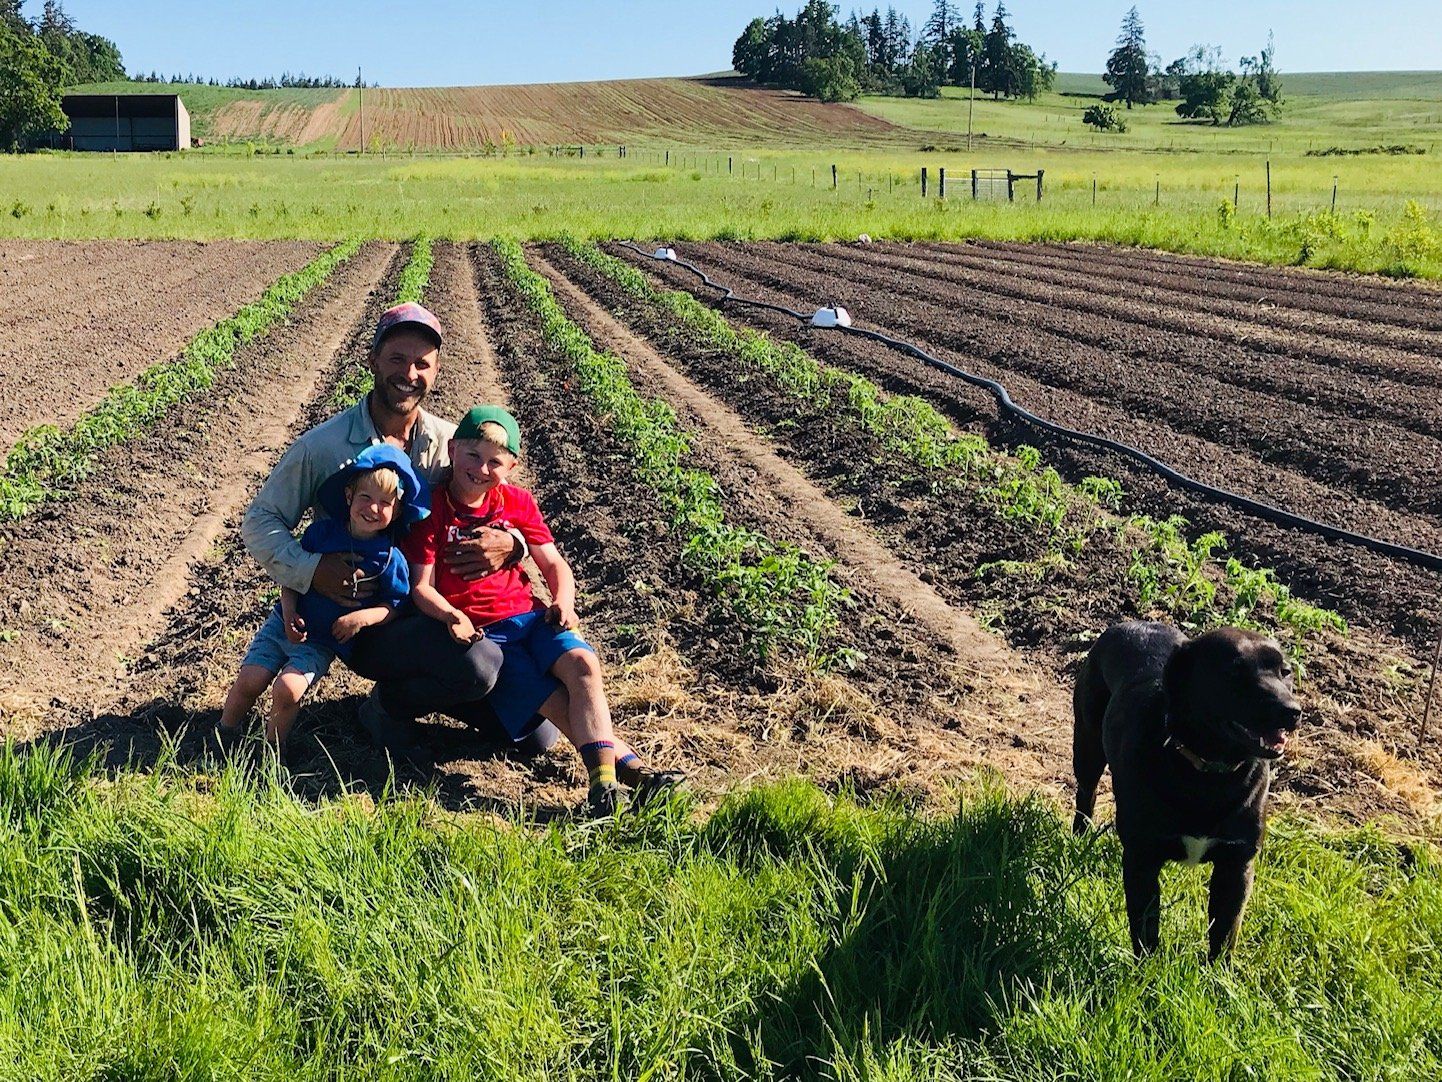 Next Happening: Farm Happenings for May 18, 2021